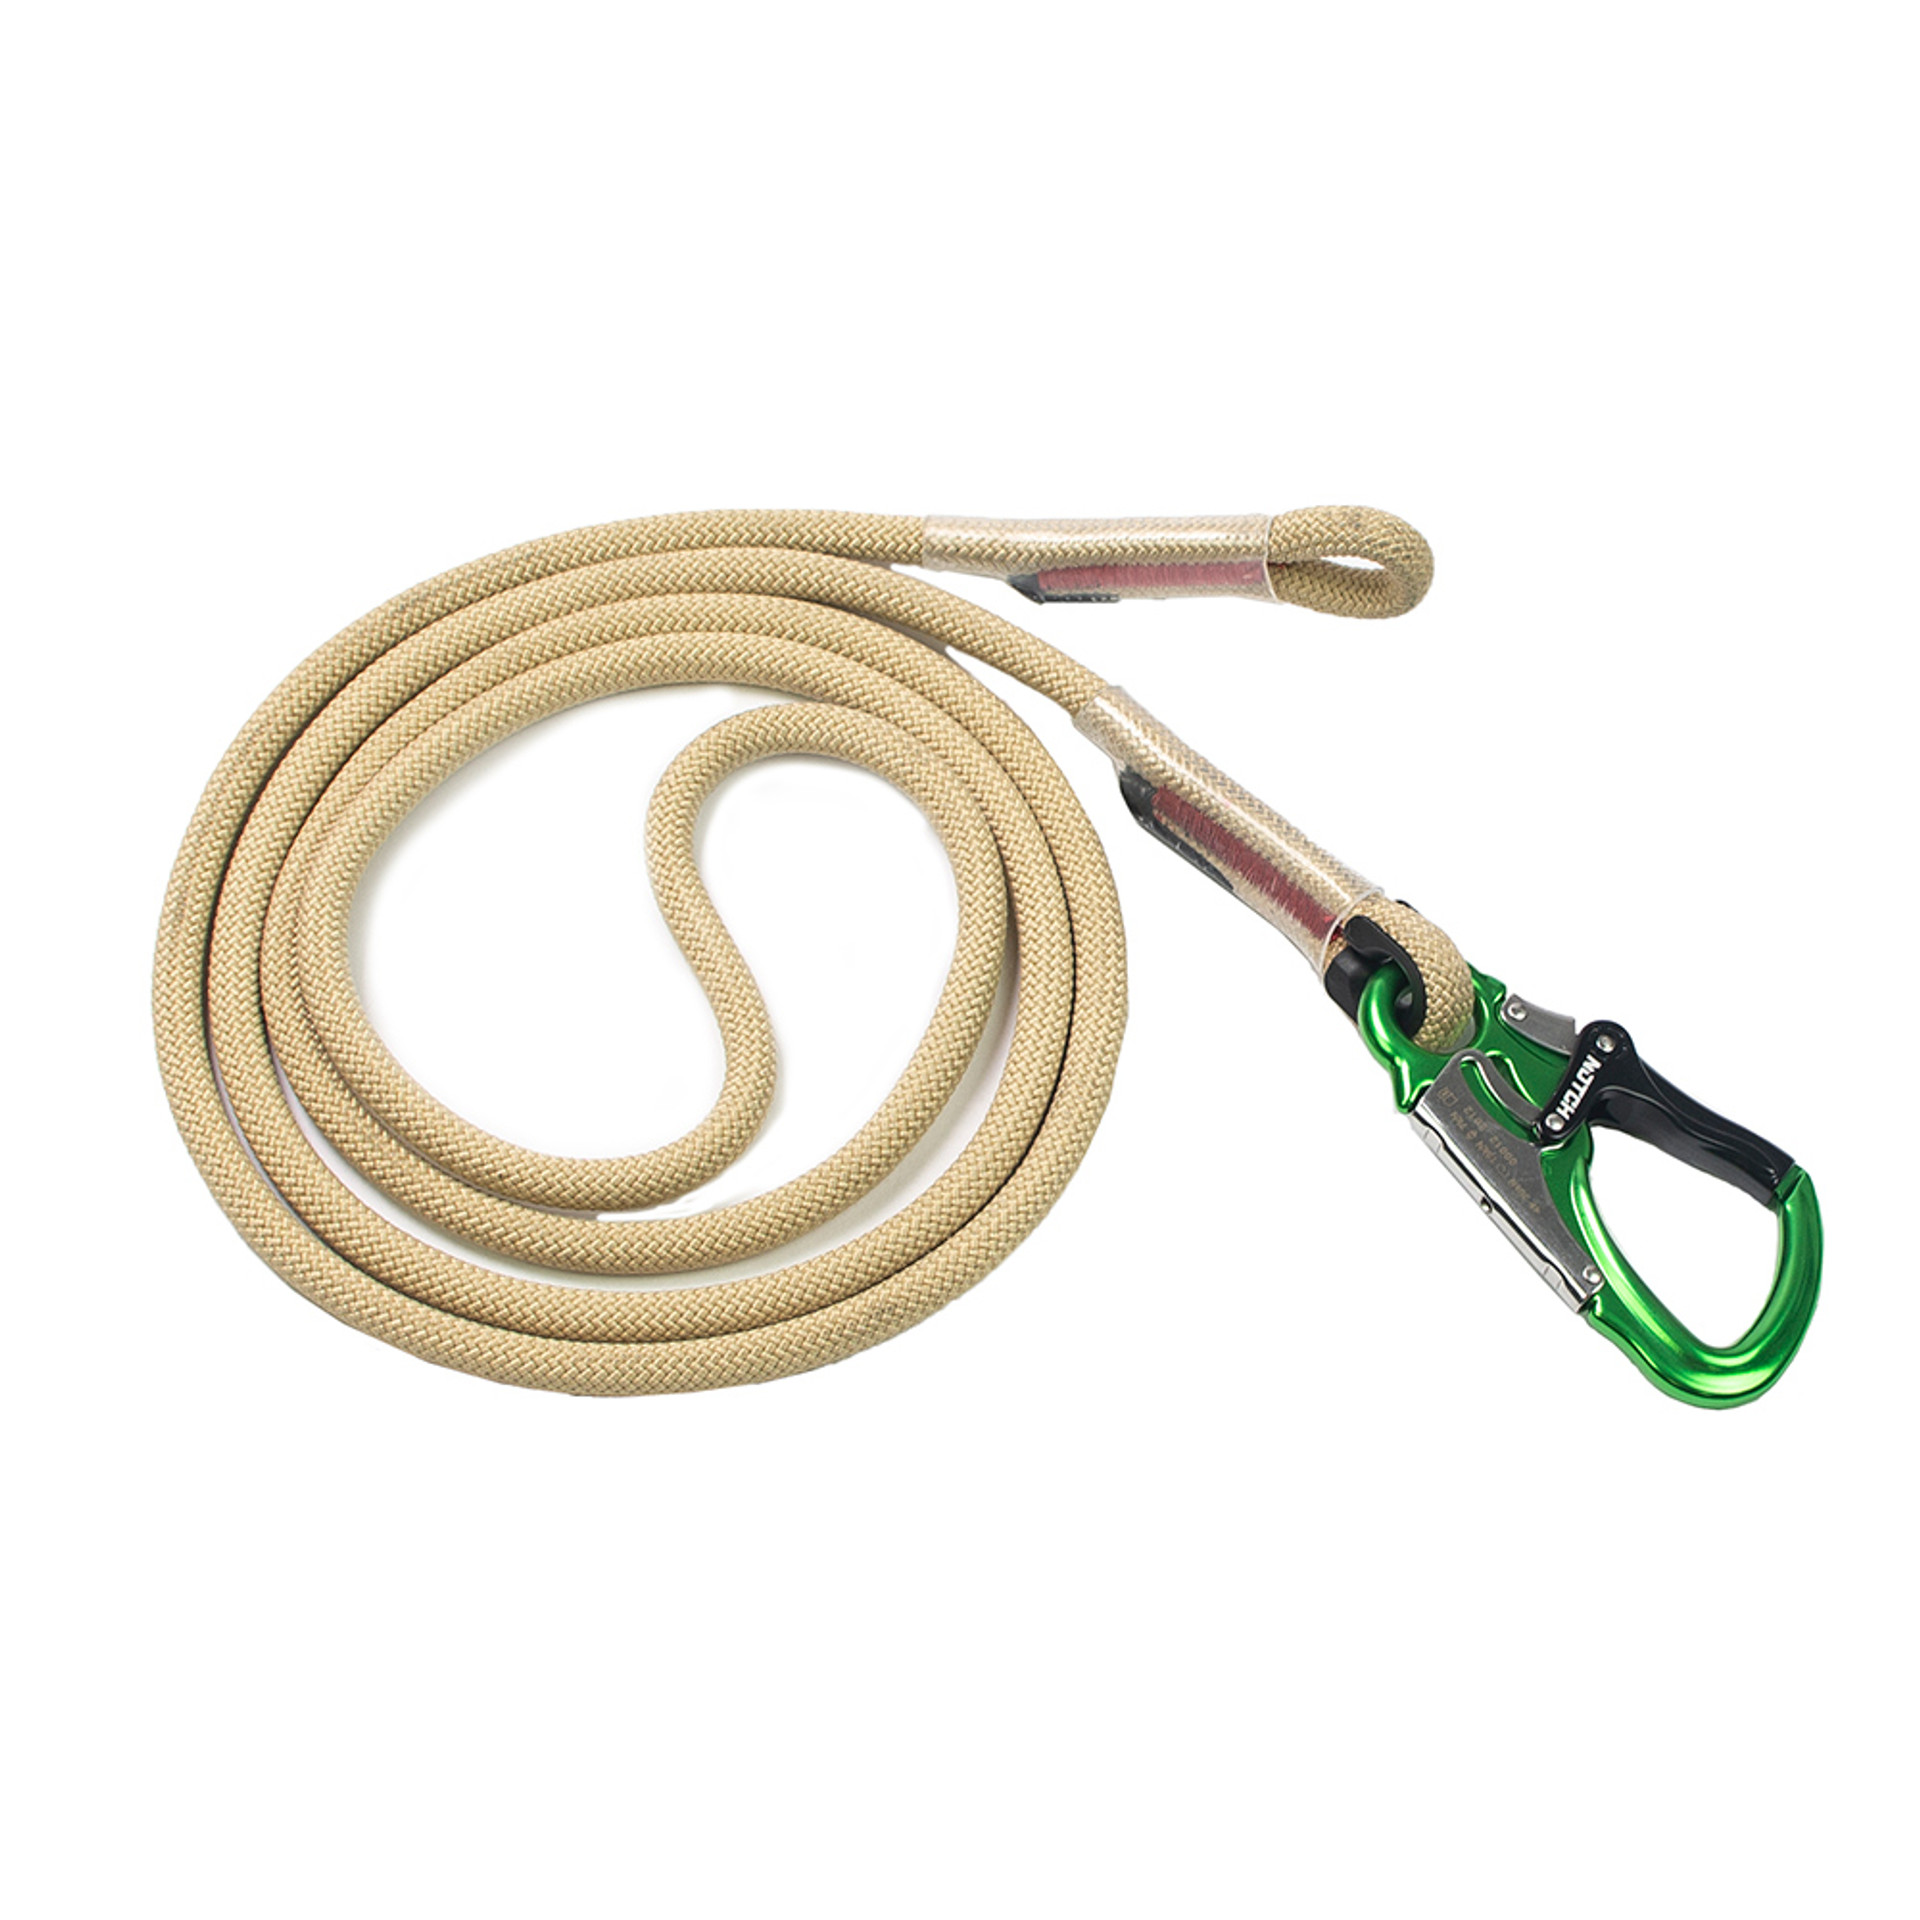 Cut-Resistant Lanyards from Sterling TriTech Rope